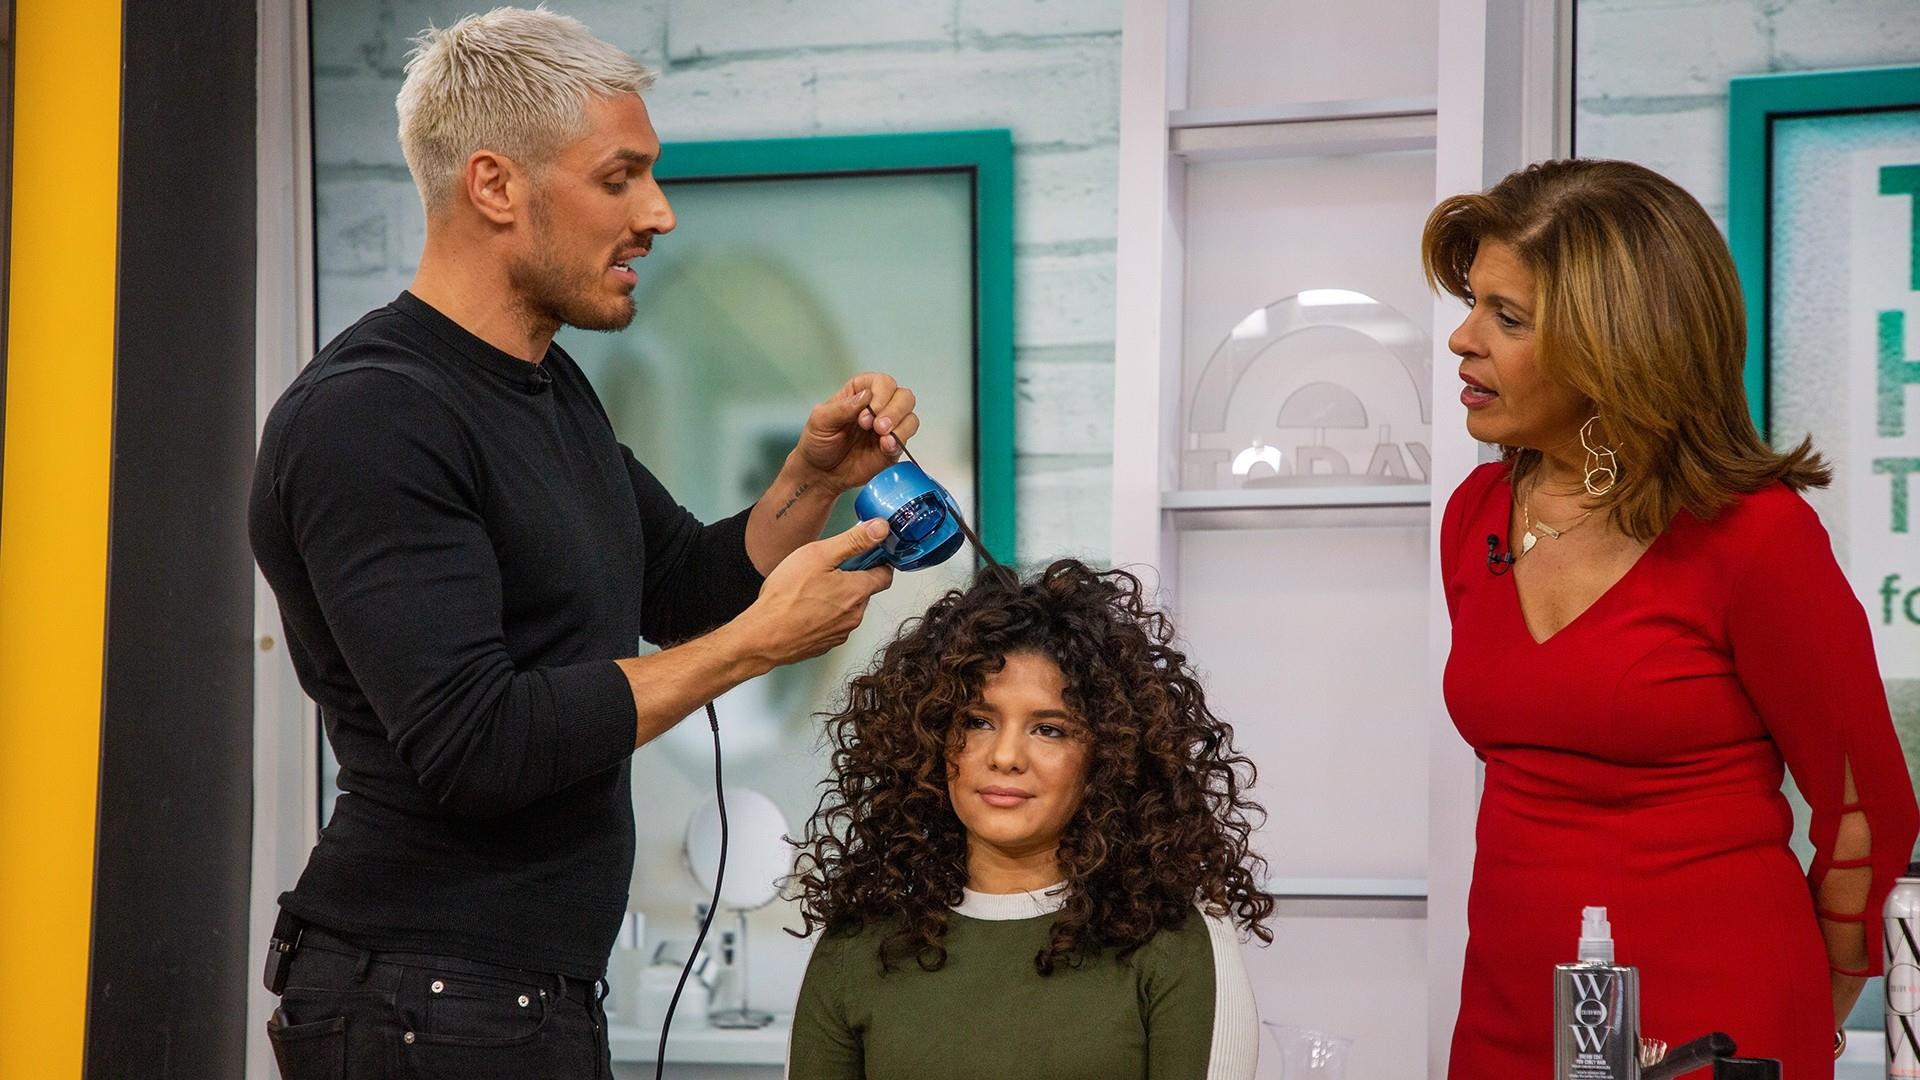 Celebrity hairstylist Chris Appleton shows the hottest hair trends right now